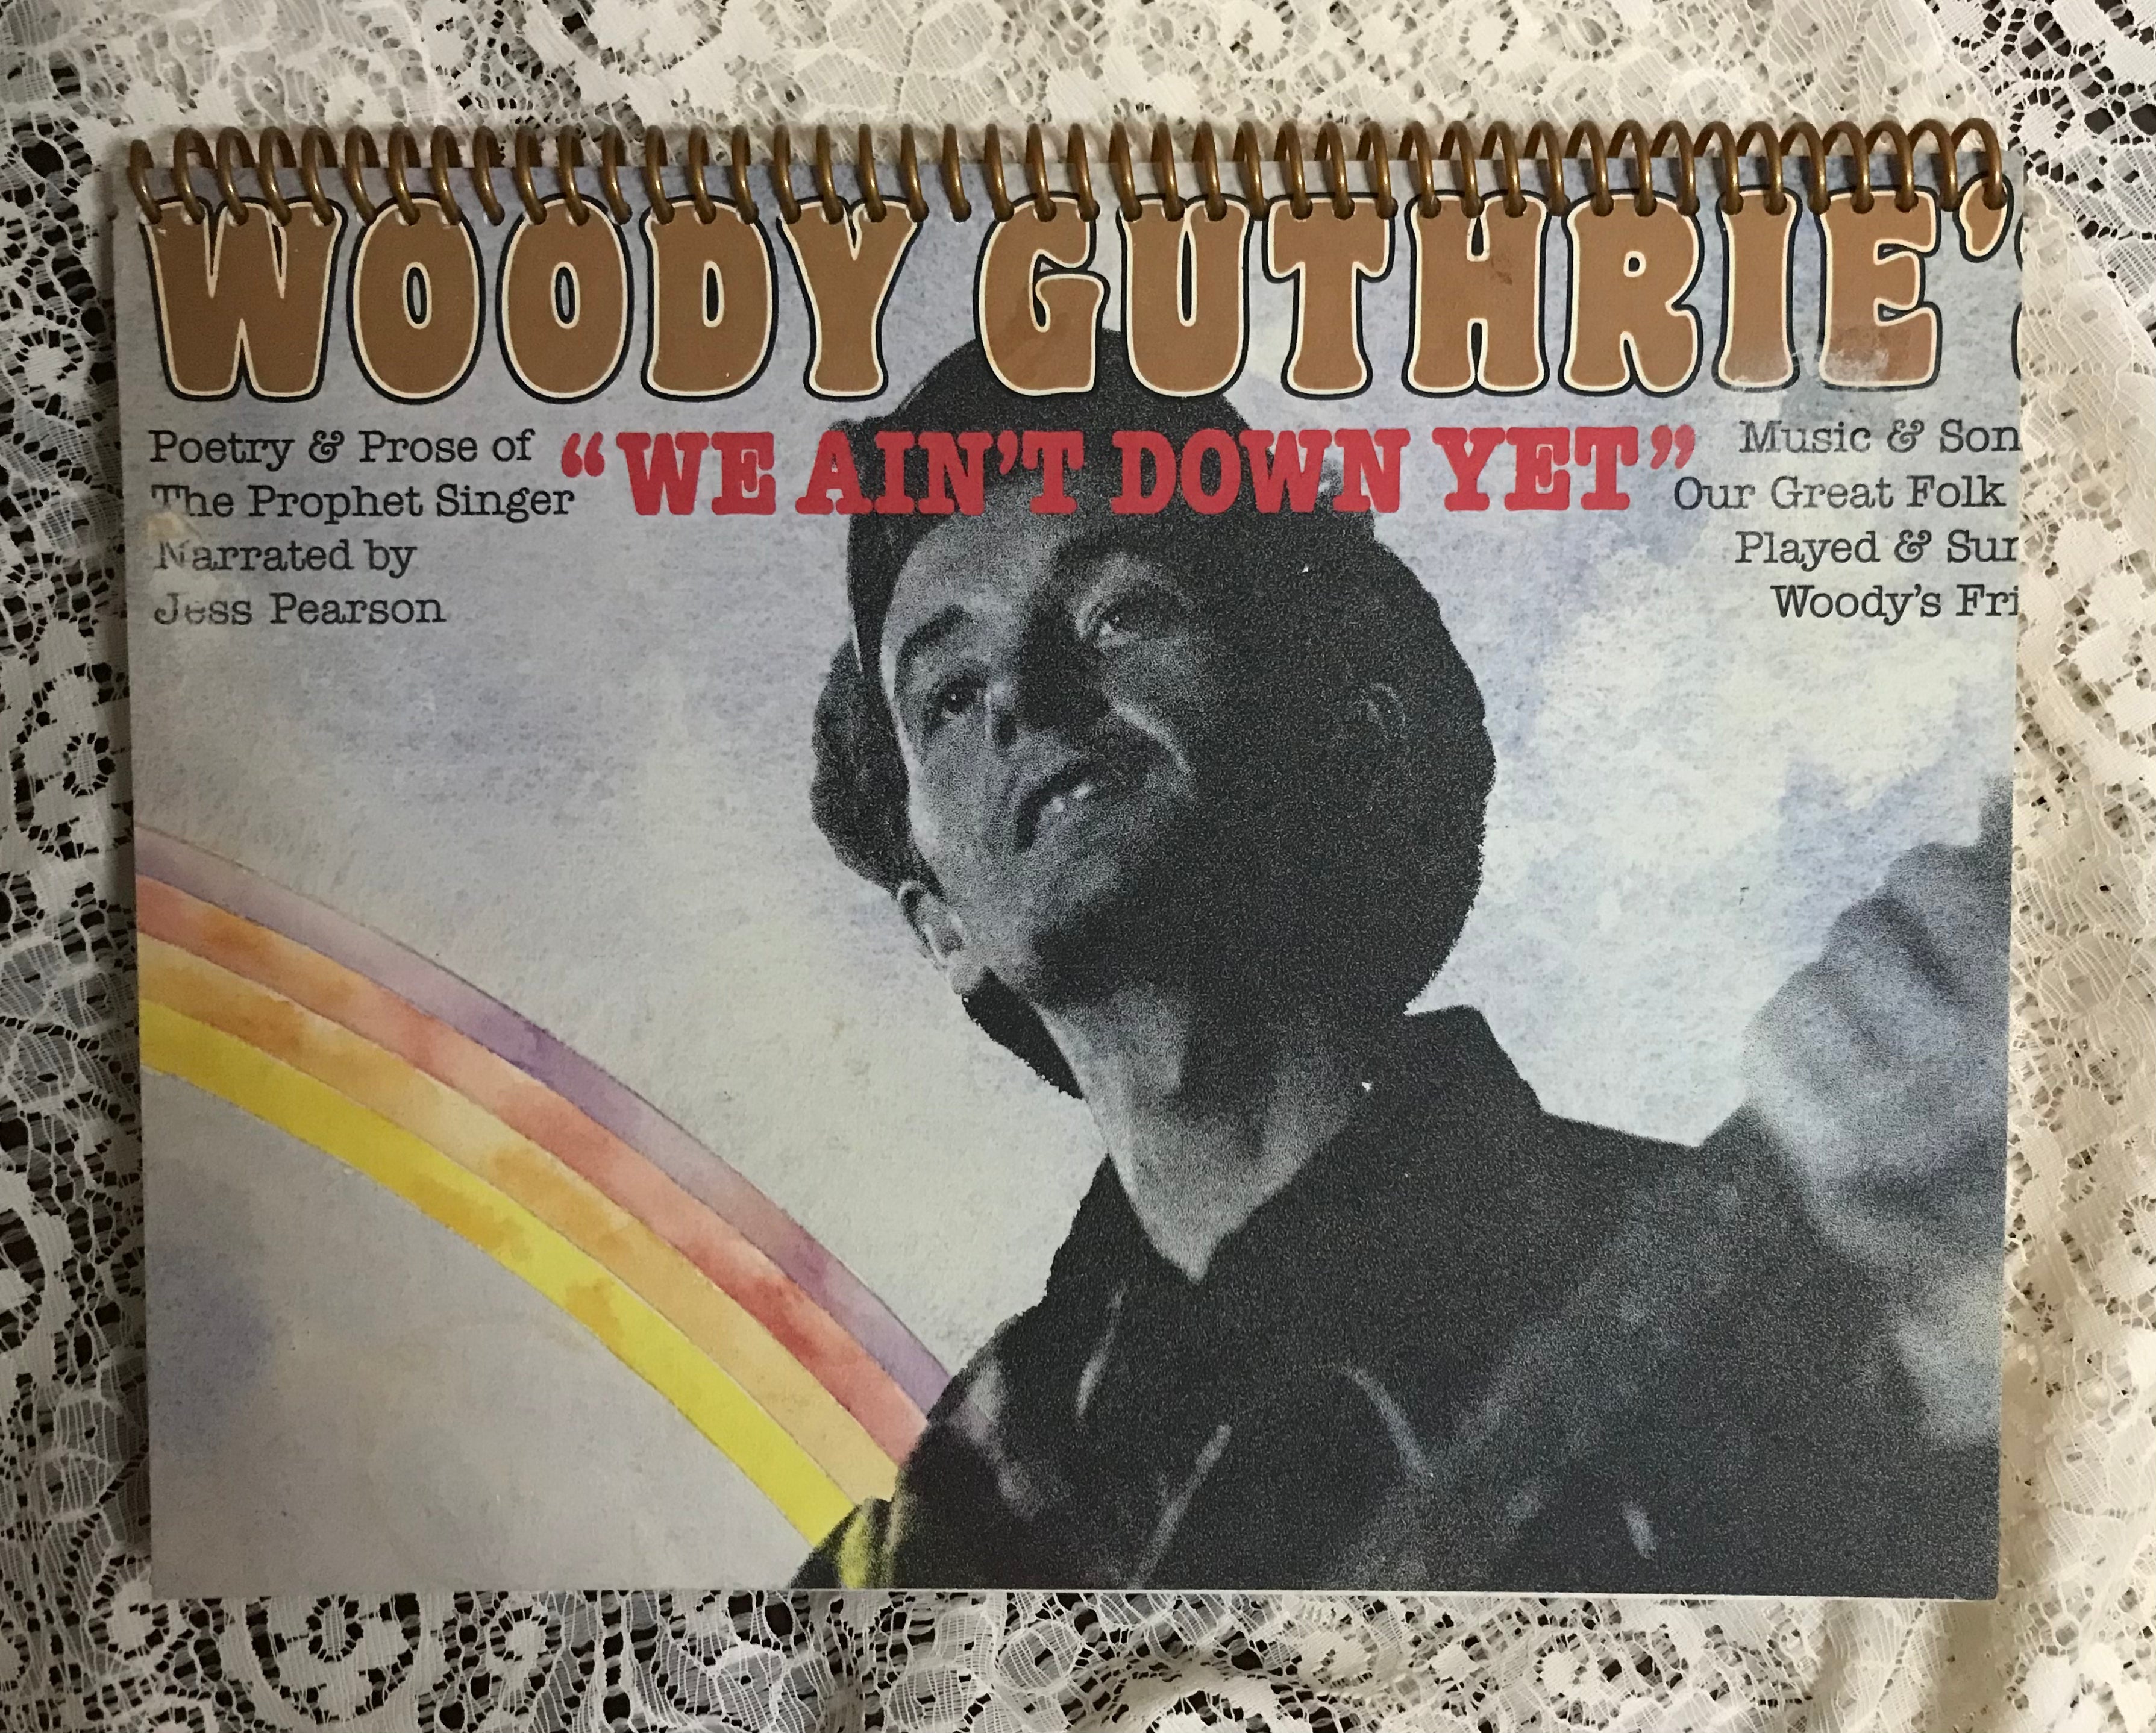 Woody Guthrie Album We Ain’t Down Yet Cover Notebook